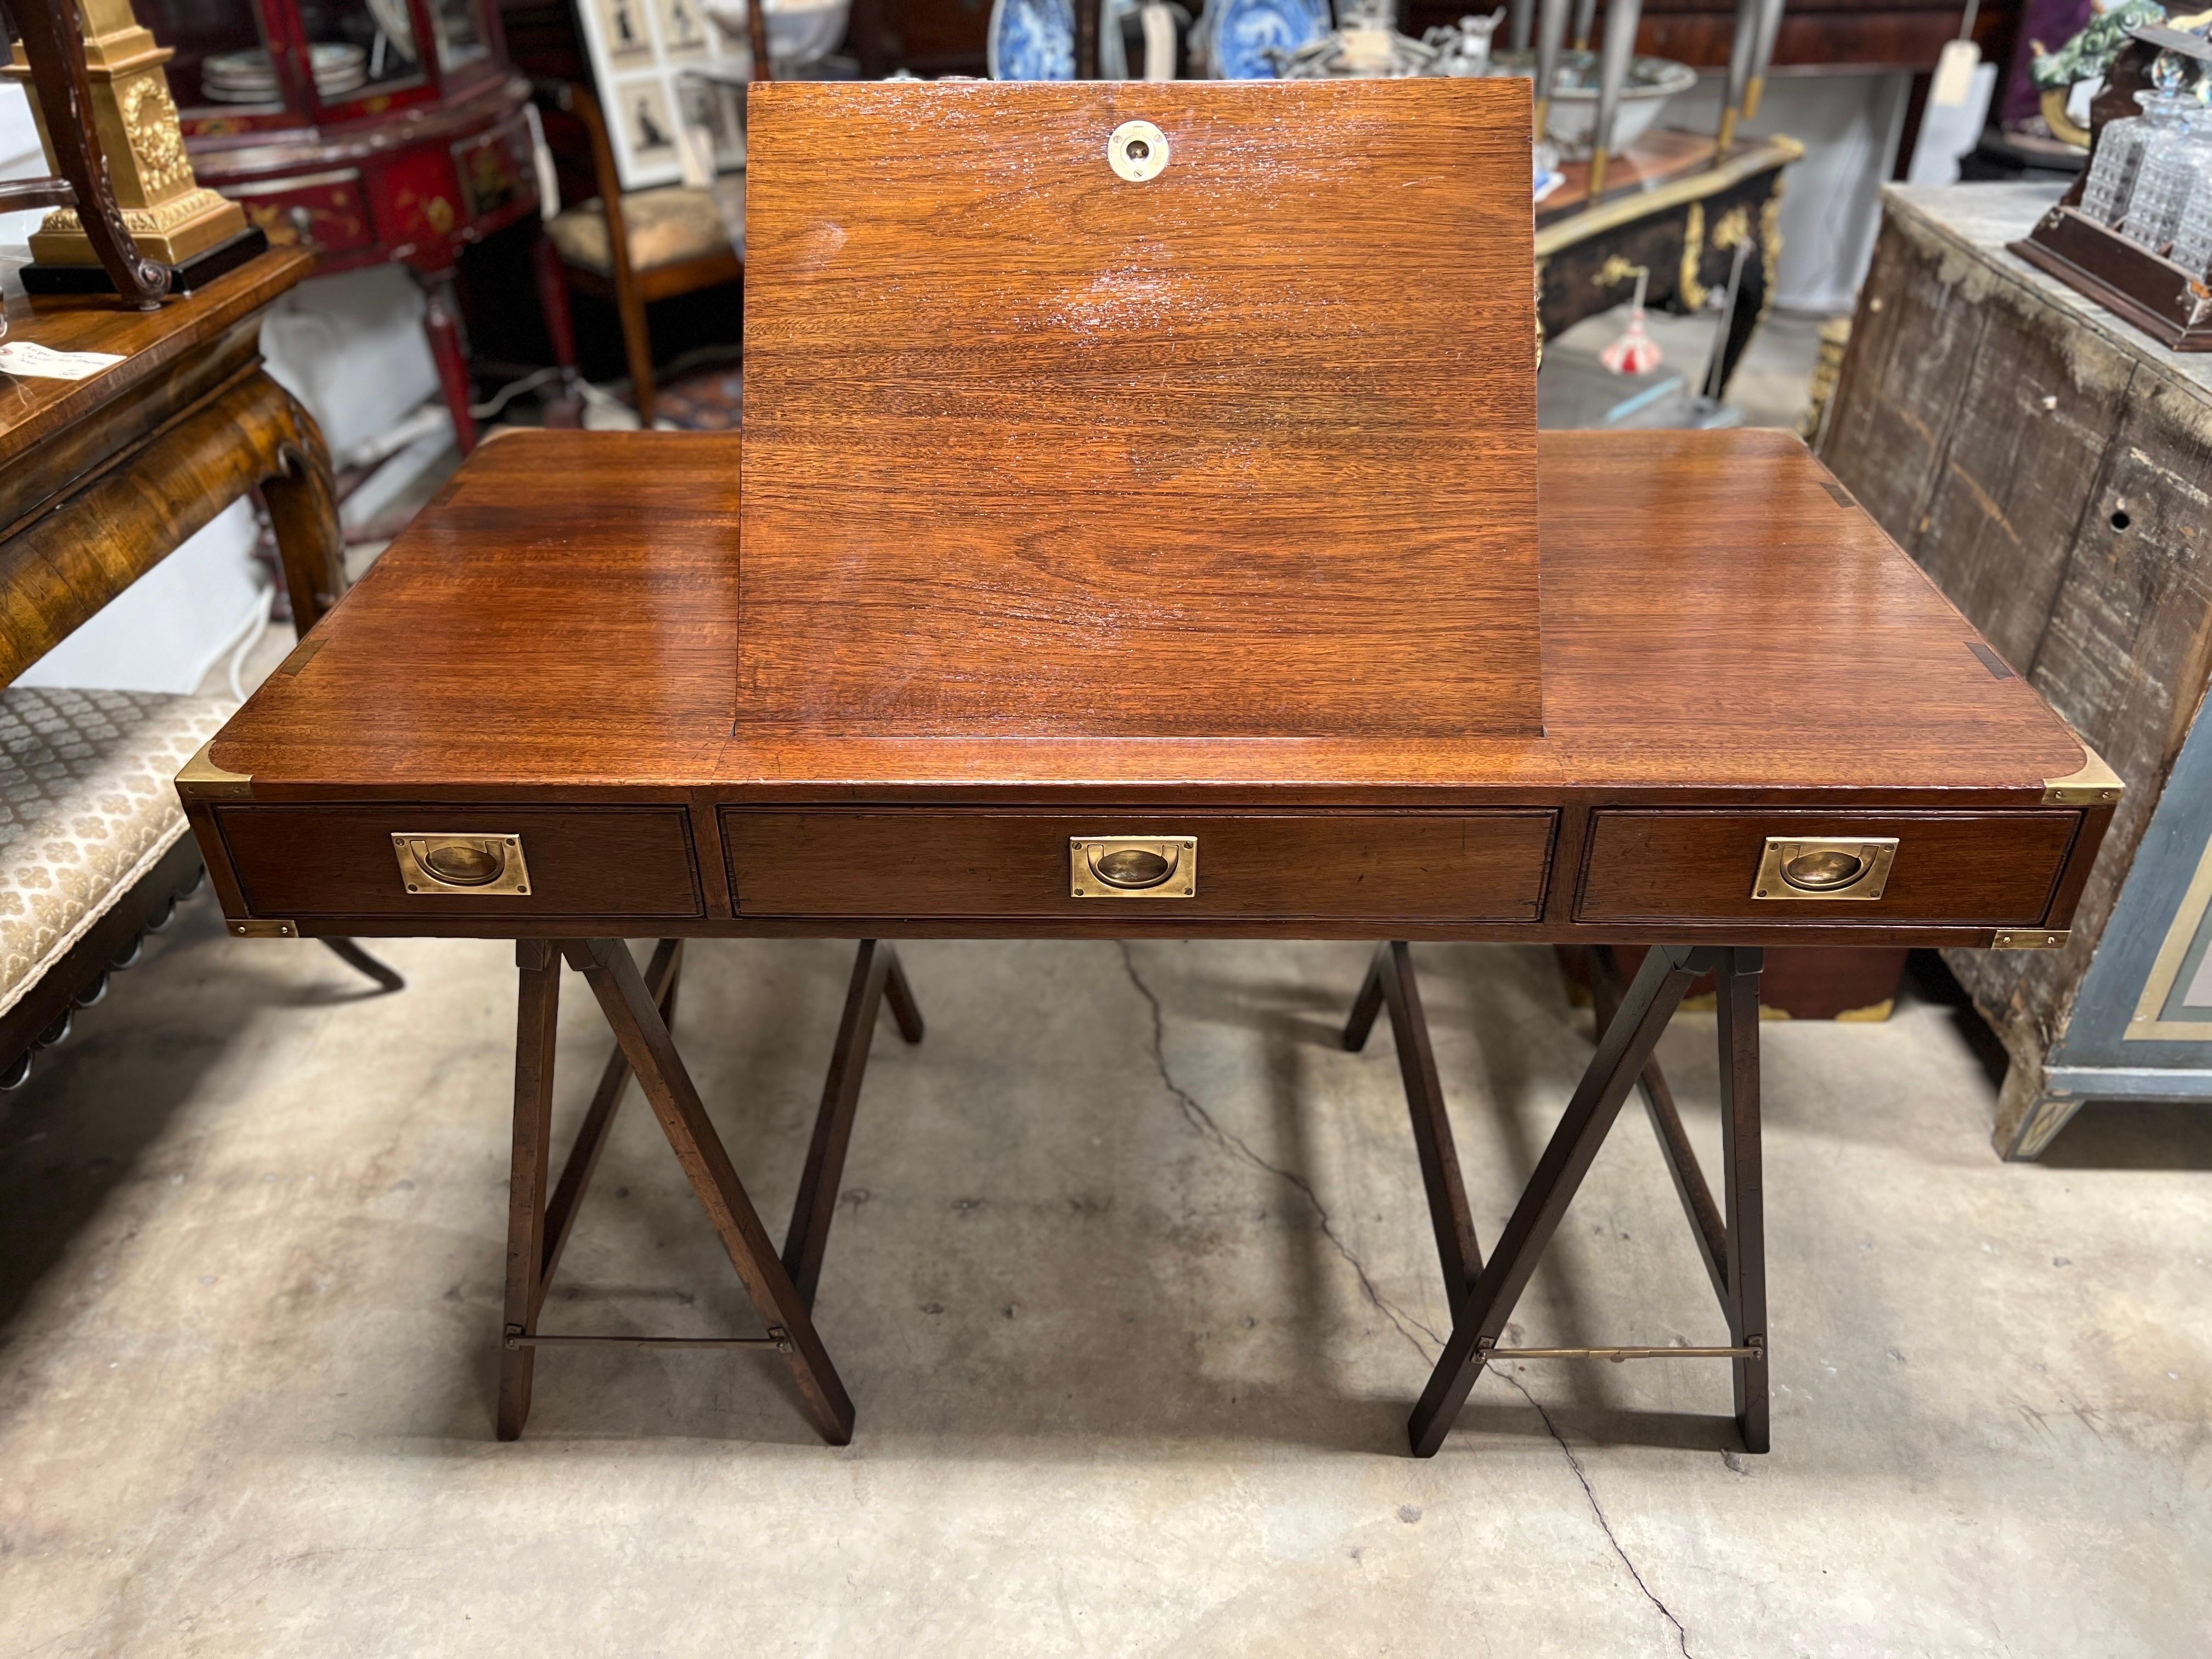 English, mid century.

A beautiful English campaign desk in the military style, having two collapsible trestle bases. The from has 3 drawers with original polished brass handles. The sides with fitted and recessed handles for easy transportation and